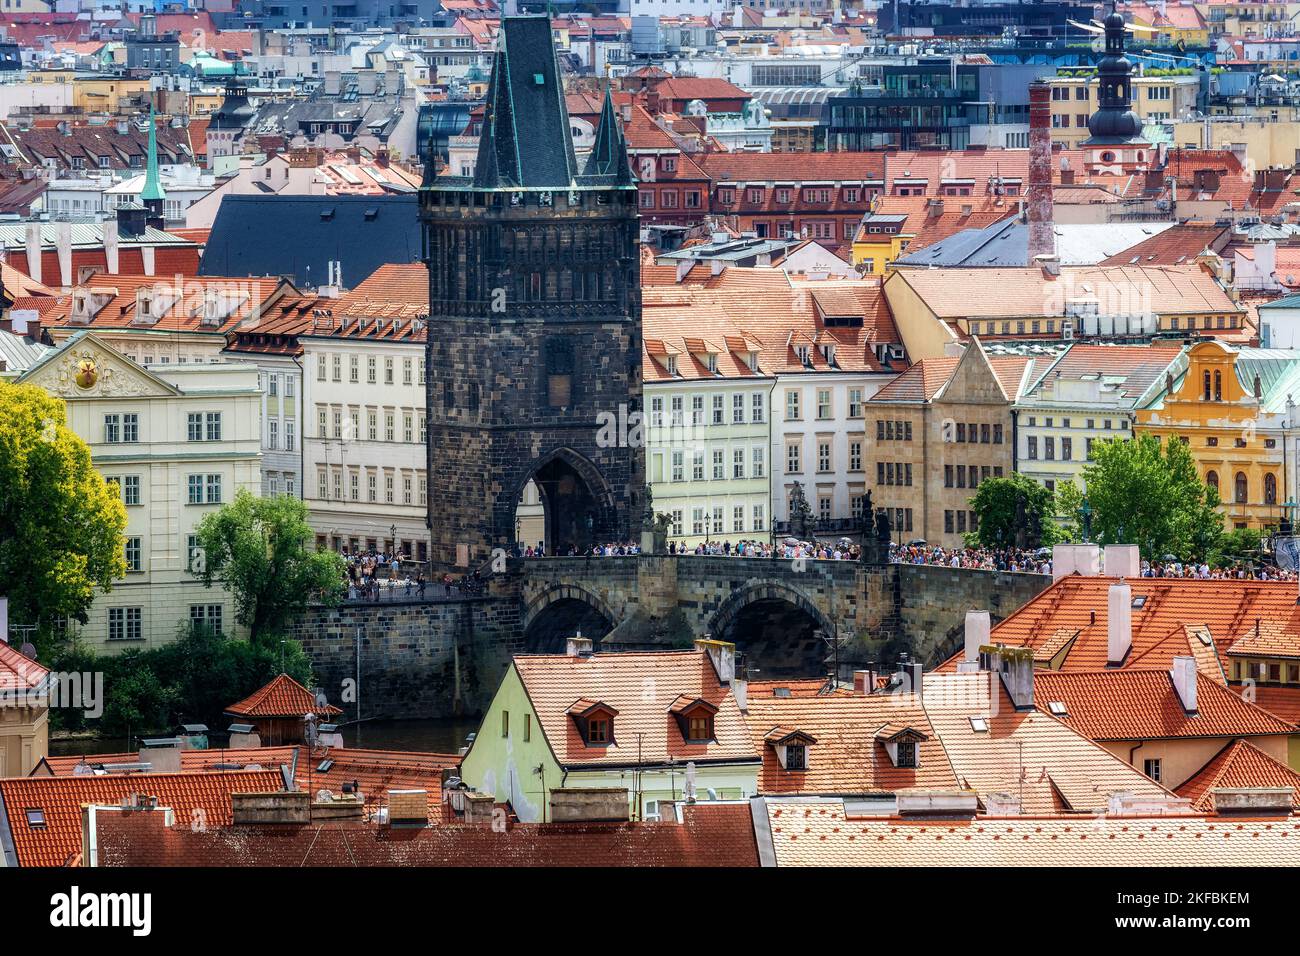 Tiled roofs of the city of Prague and a fragment of the Charles Bridge over the Vltava River. Stock Photo